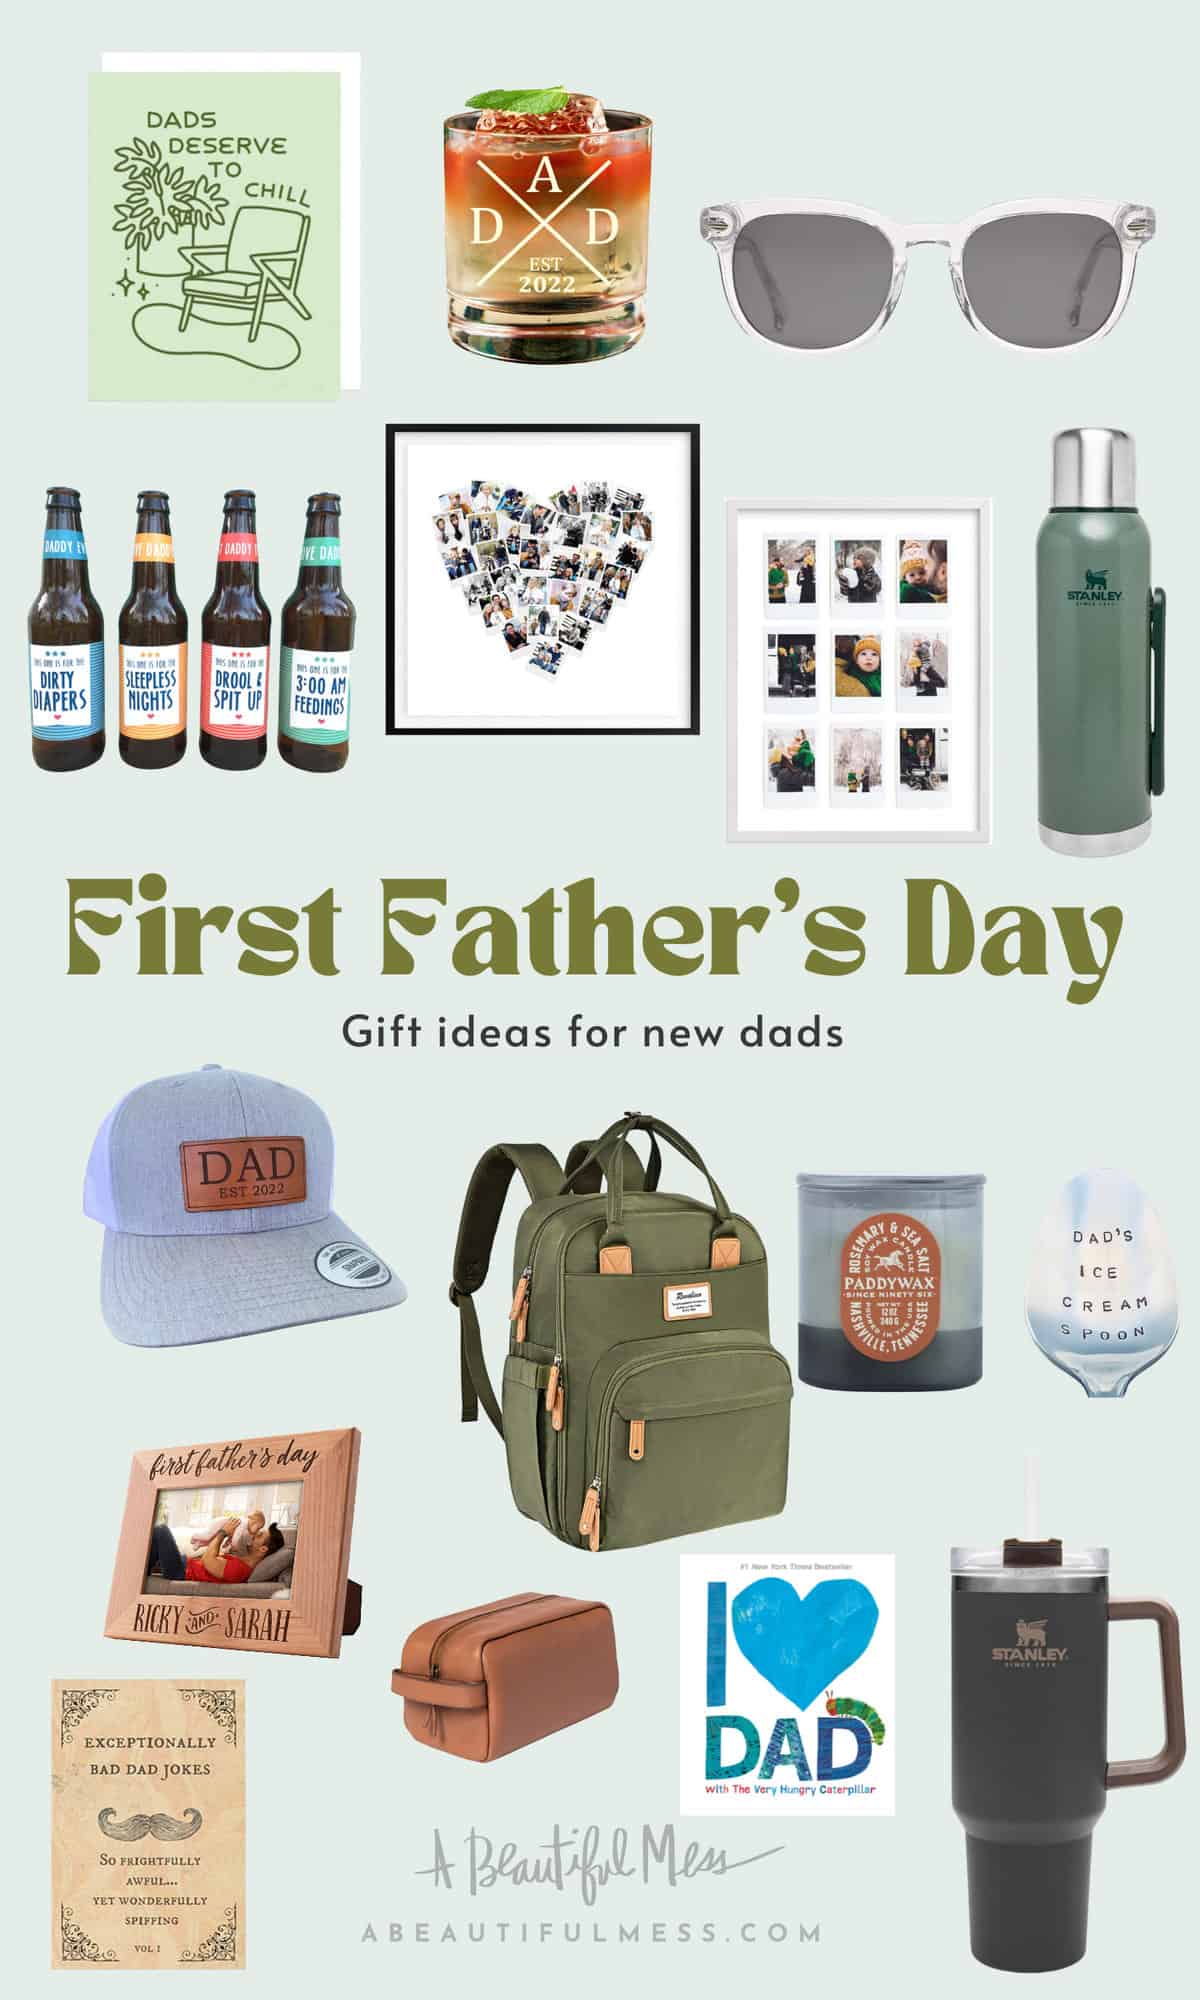 What do most dads want for Father's Day?